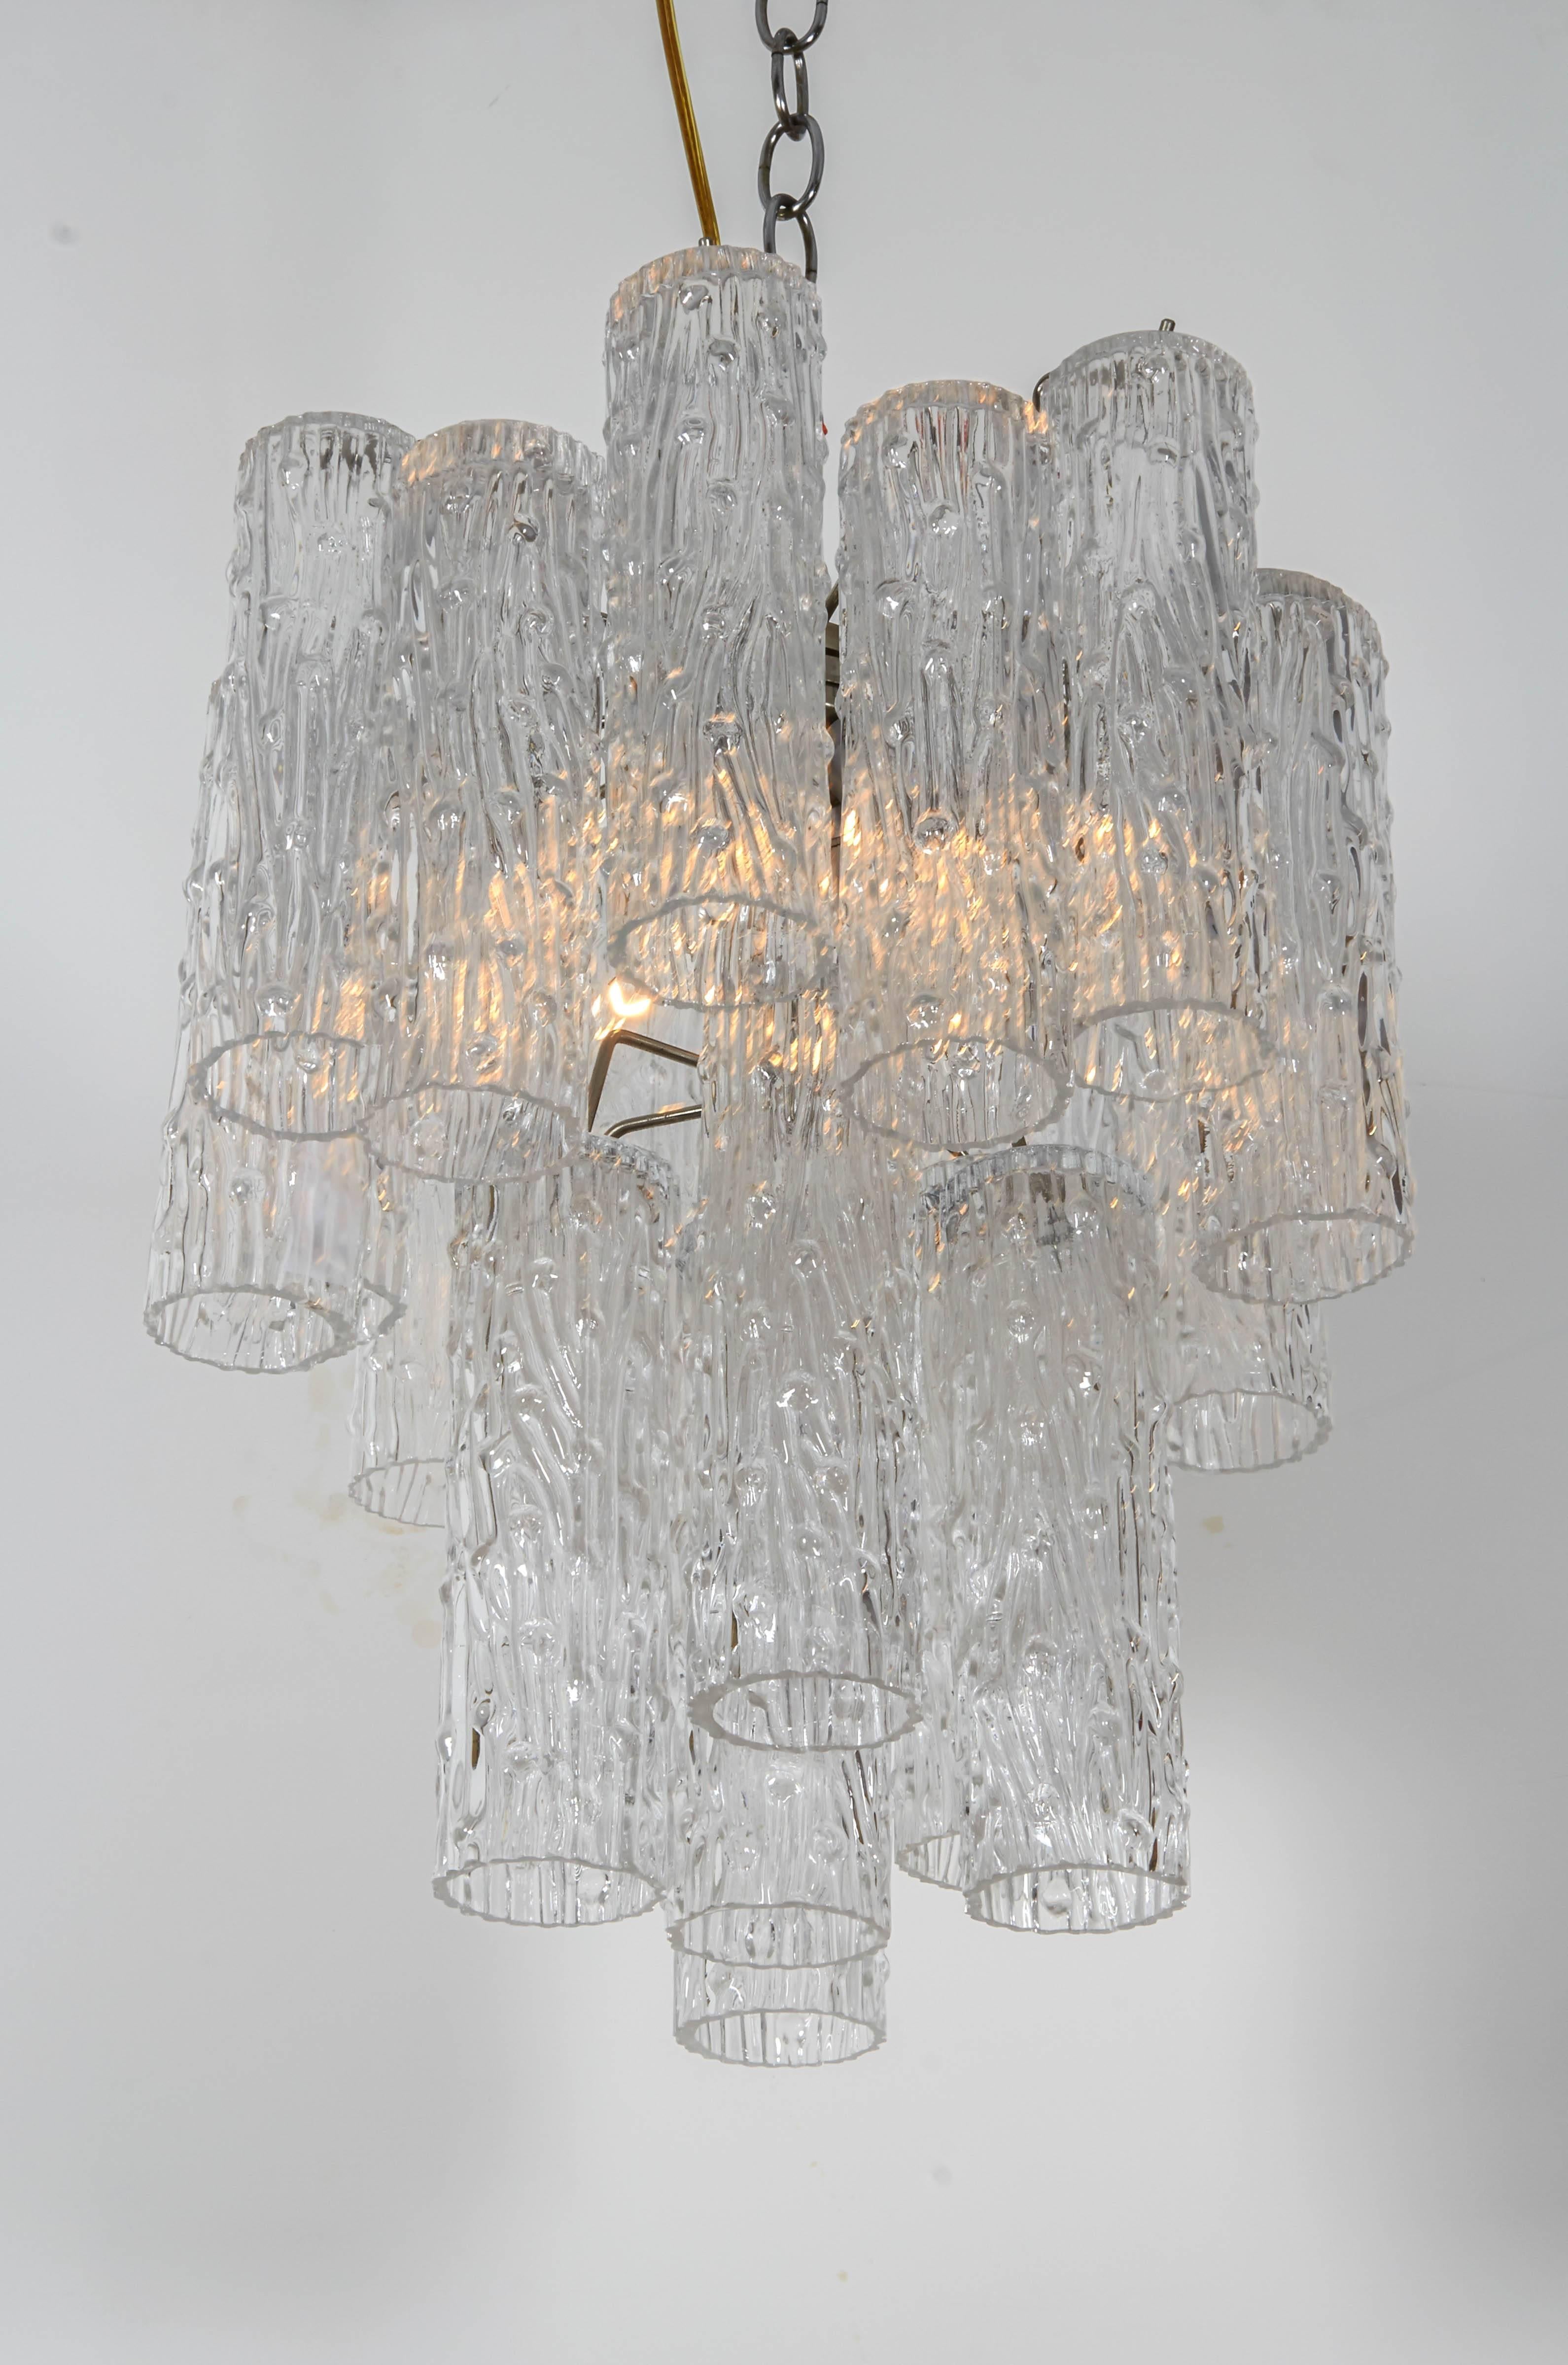 Lovely multi-tiered chandelier with heavily textured tronchi crystals. A very pretty chandelier in a versatile scale. Please contact for location.